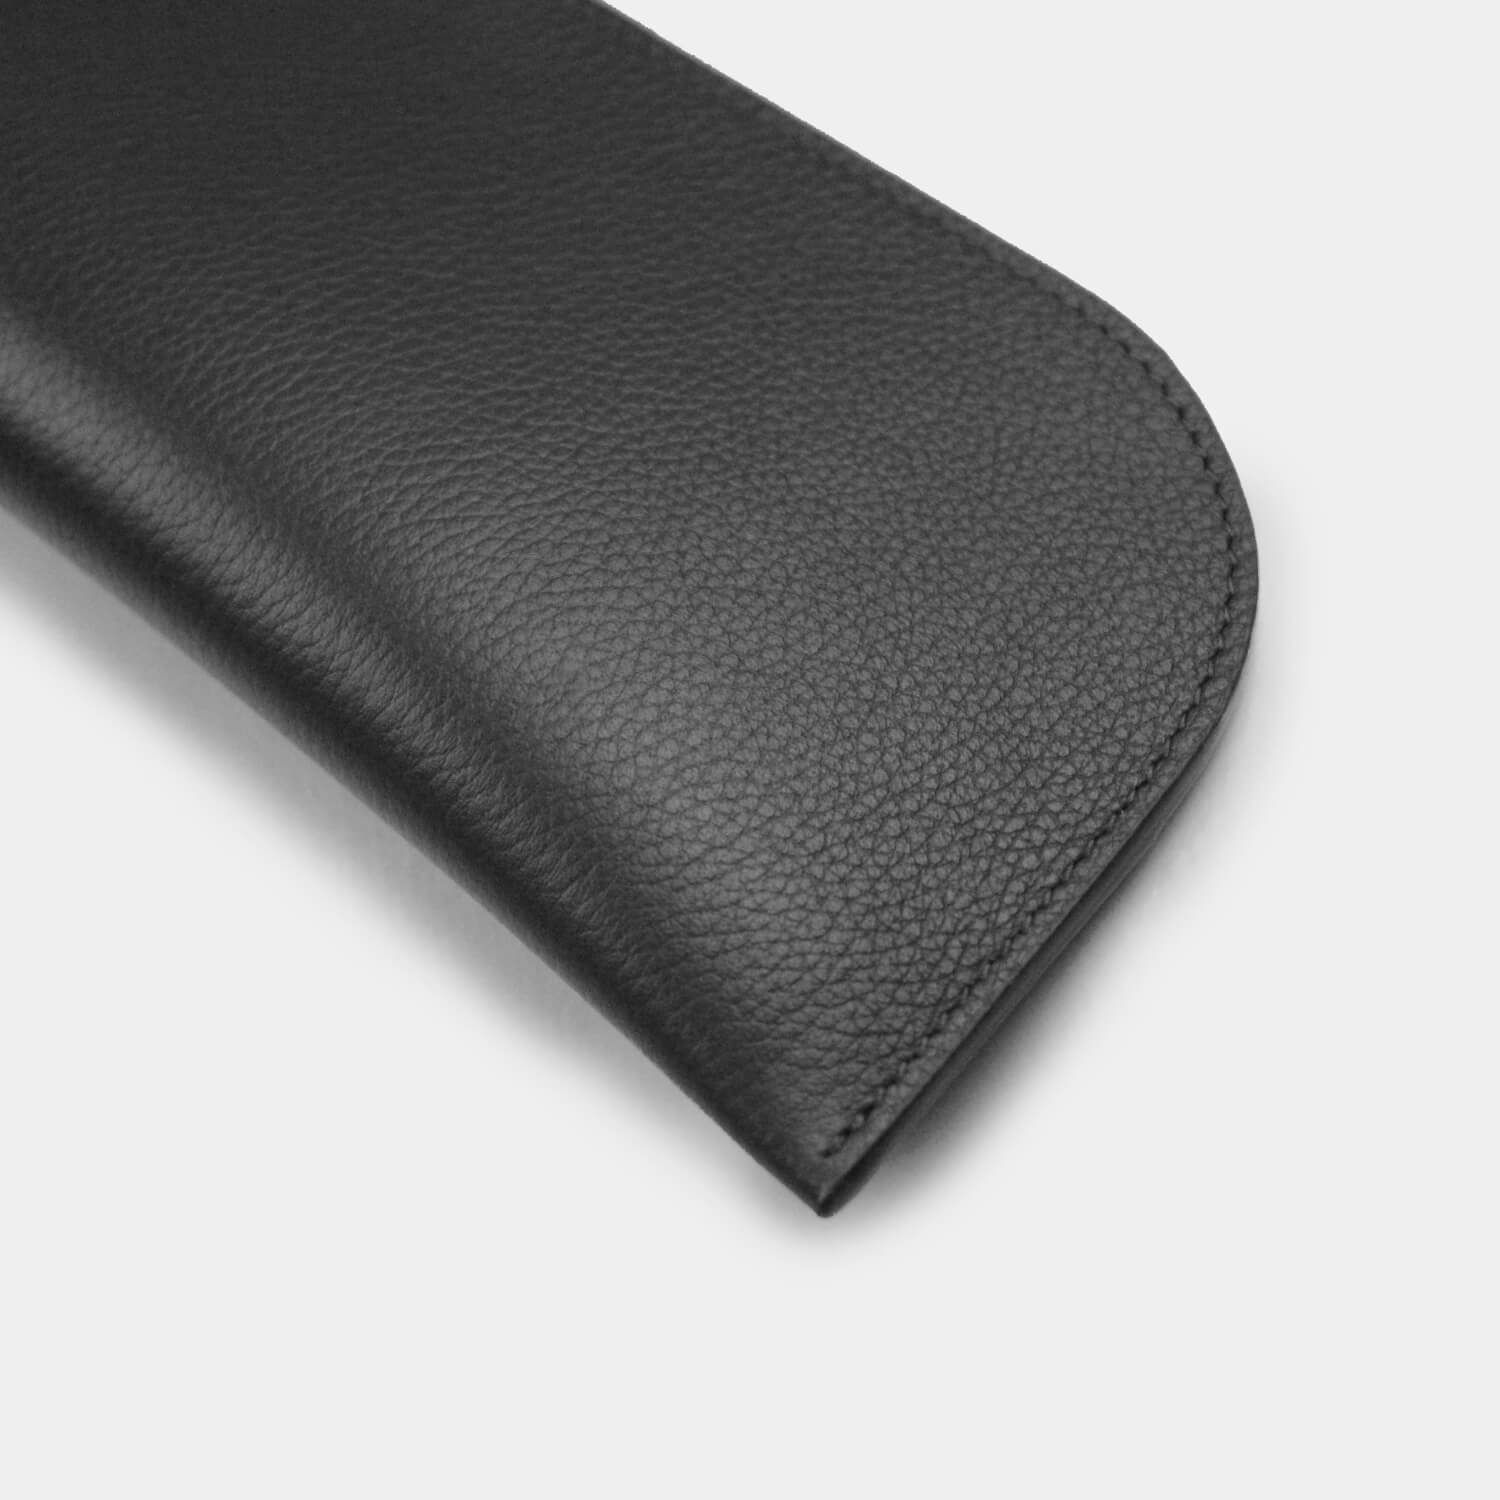 Full grain leather slip glasses case to protect and store glasses and sunglasses, branded with your company logo